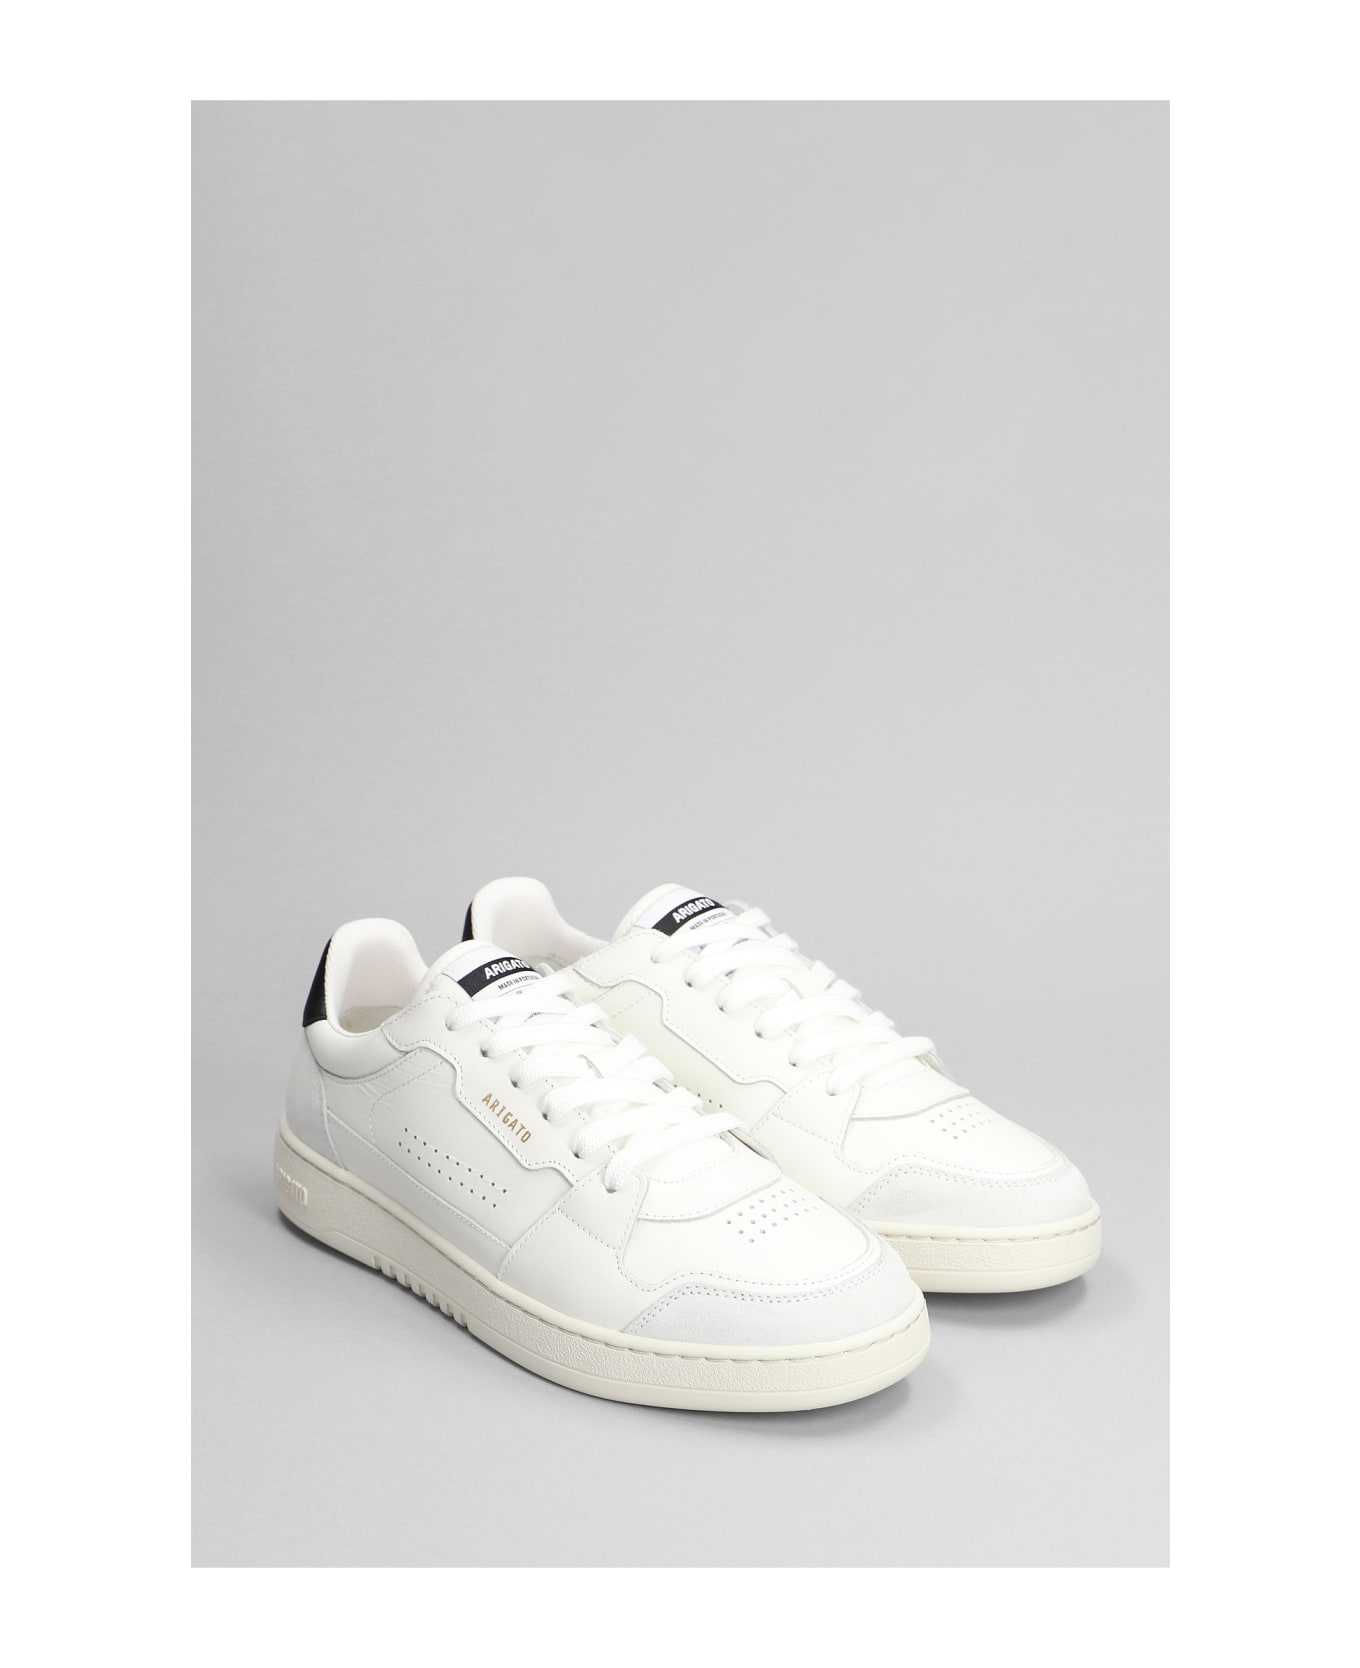 Axel Arigato Dice Lo Sneakers In White Suede And Leather - white